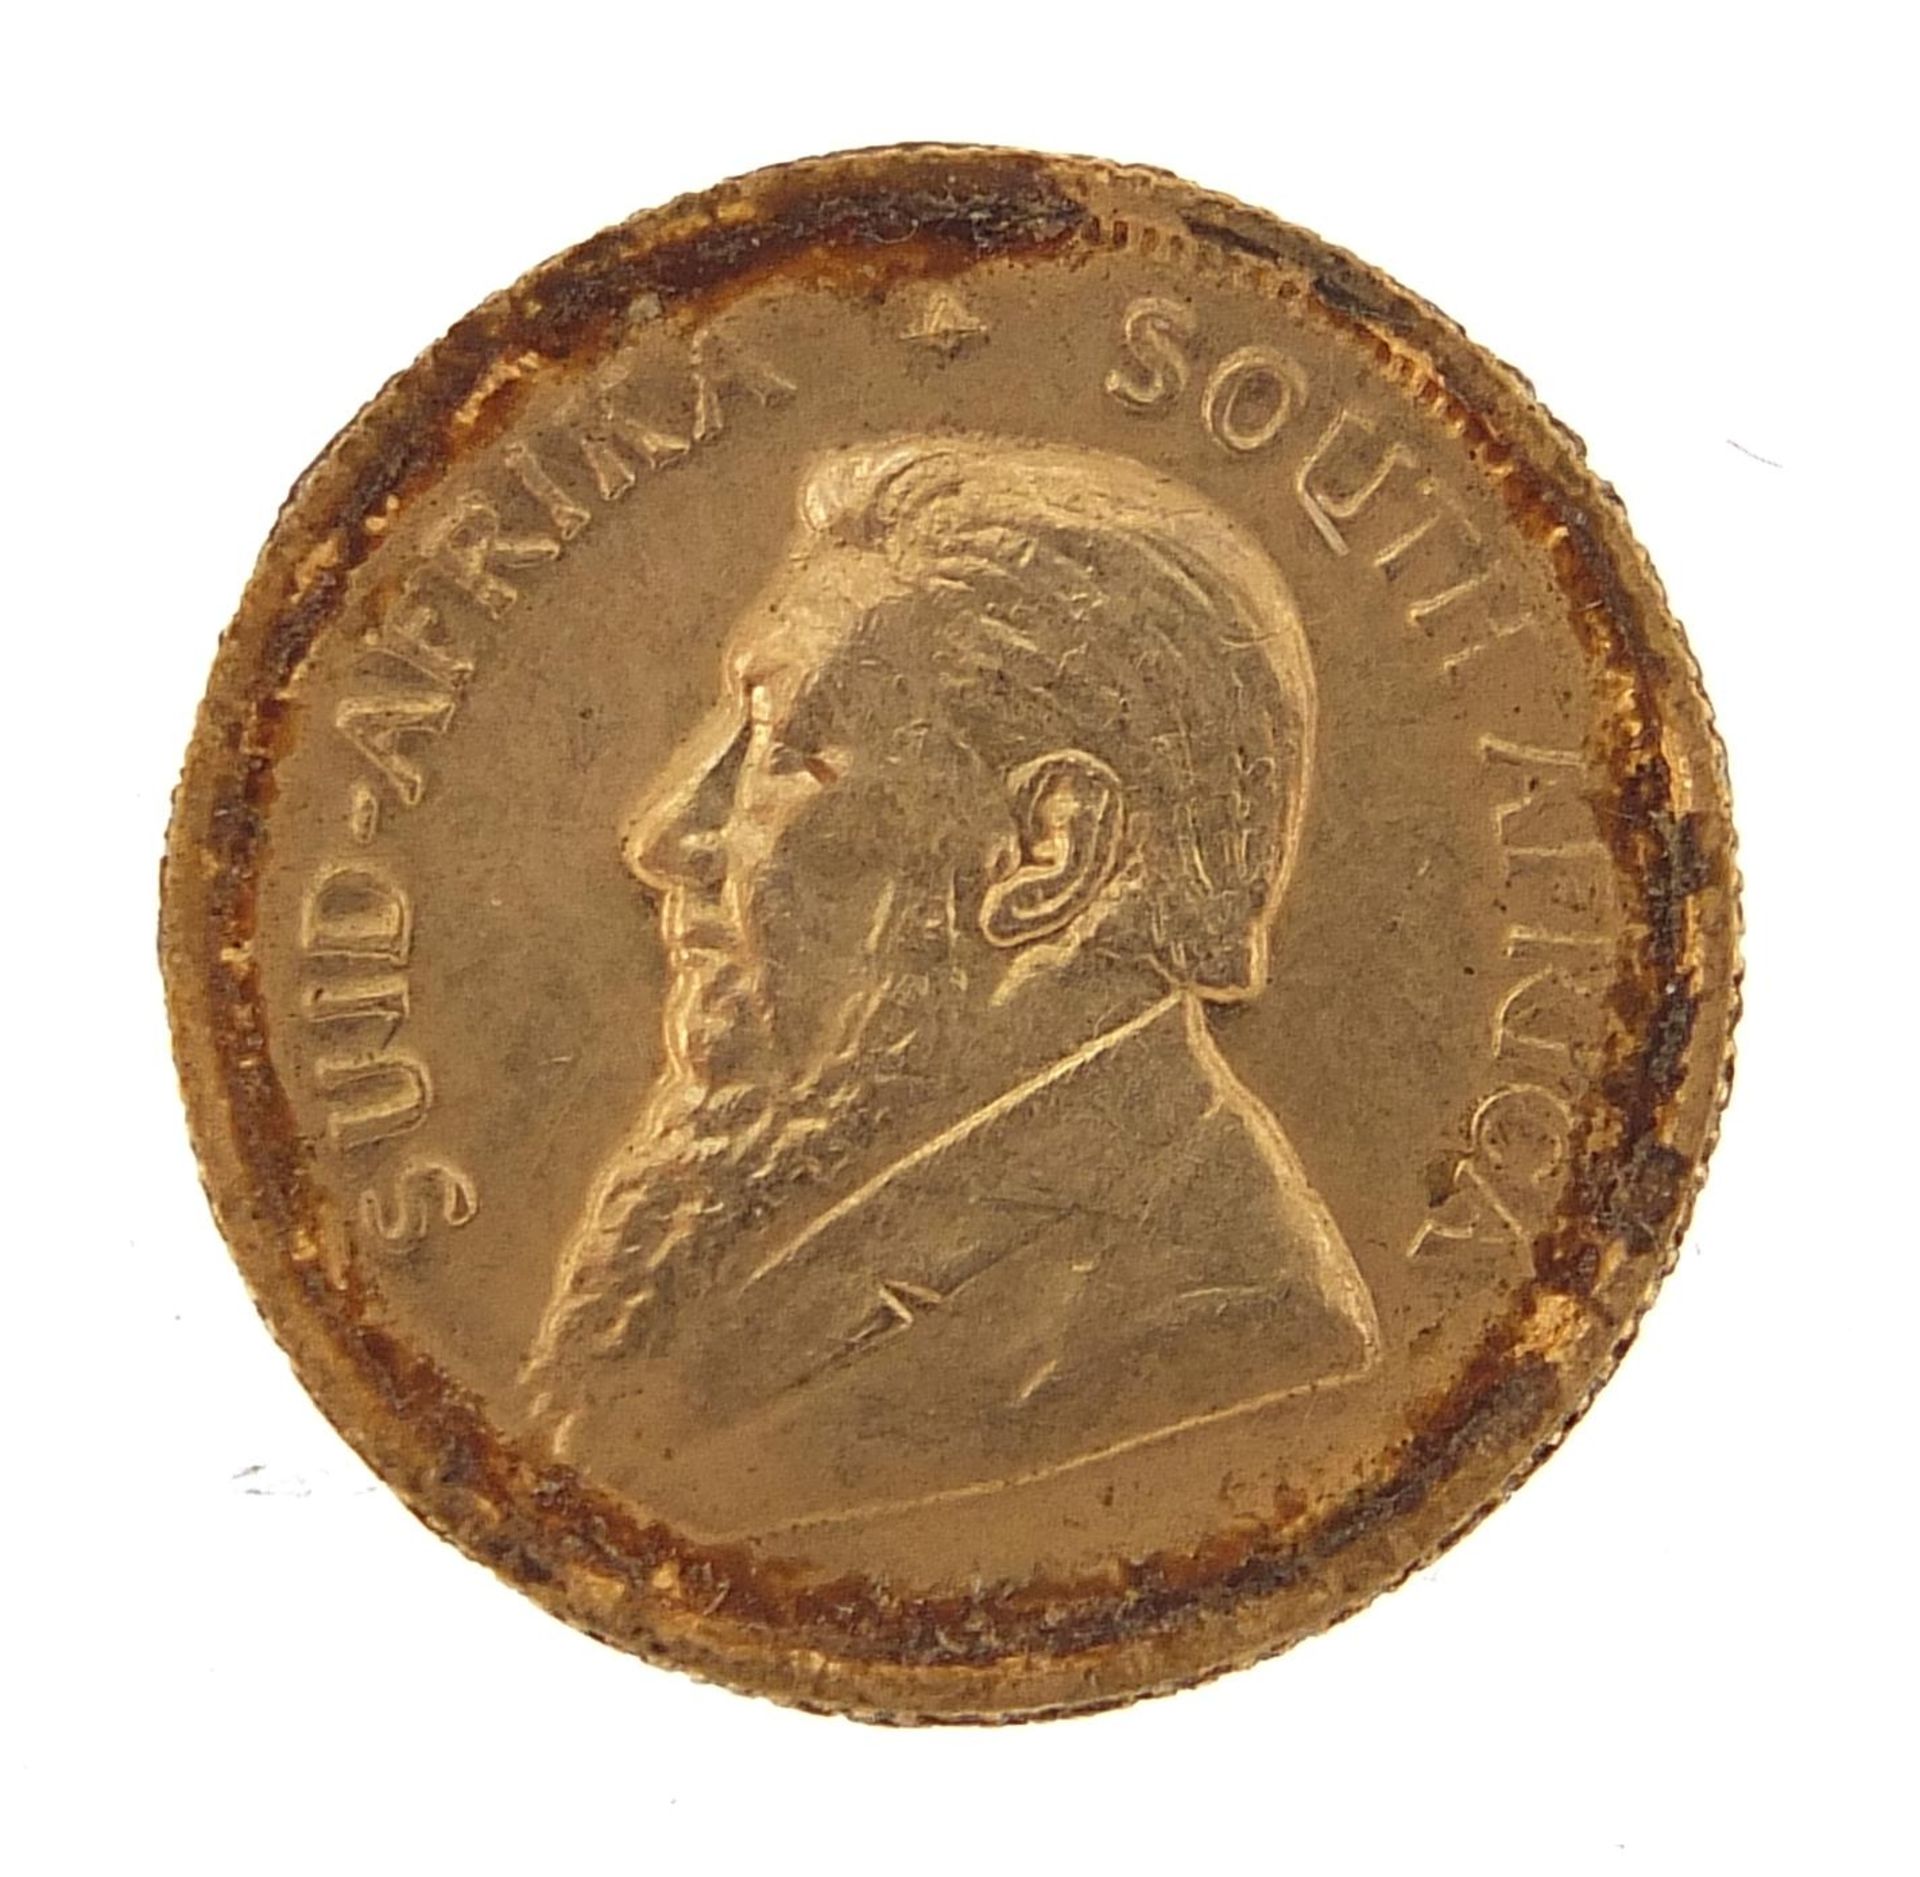 South African 1980 gold 1/10th krugerrand - this lot is sold without buyer's premium - Image 2 of 3